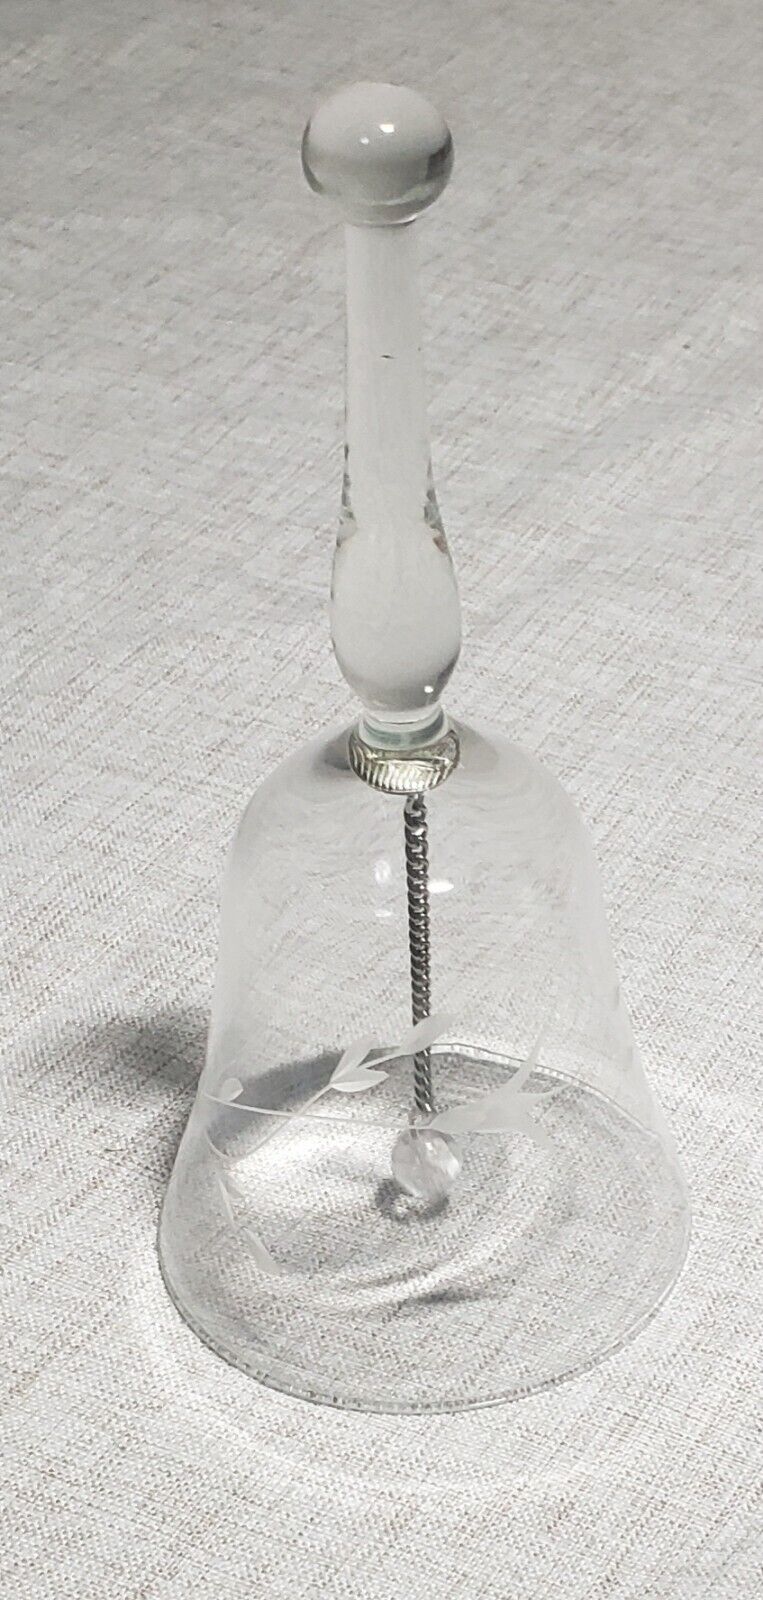 Princess House Heritage Etched Clear Crystal Glass Dinner Bell  6” Tall Vintage